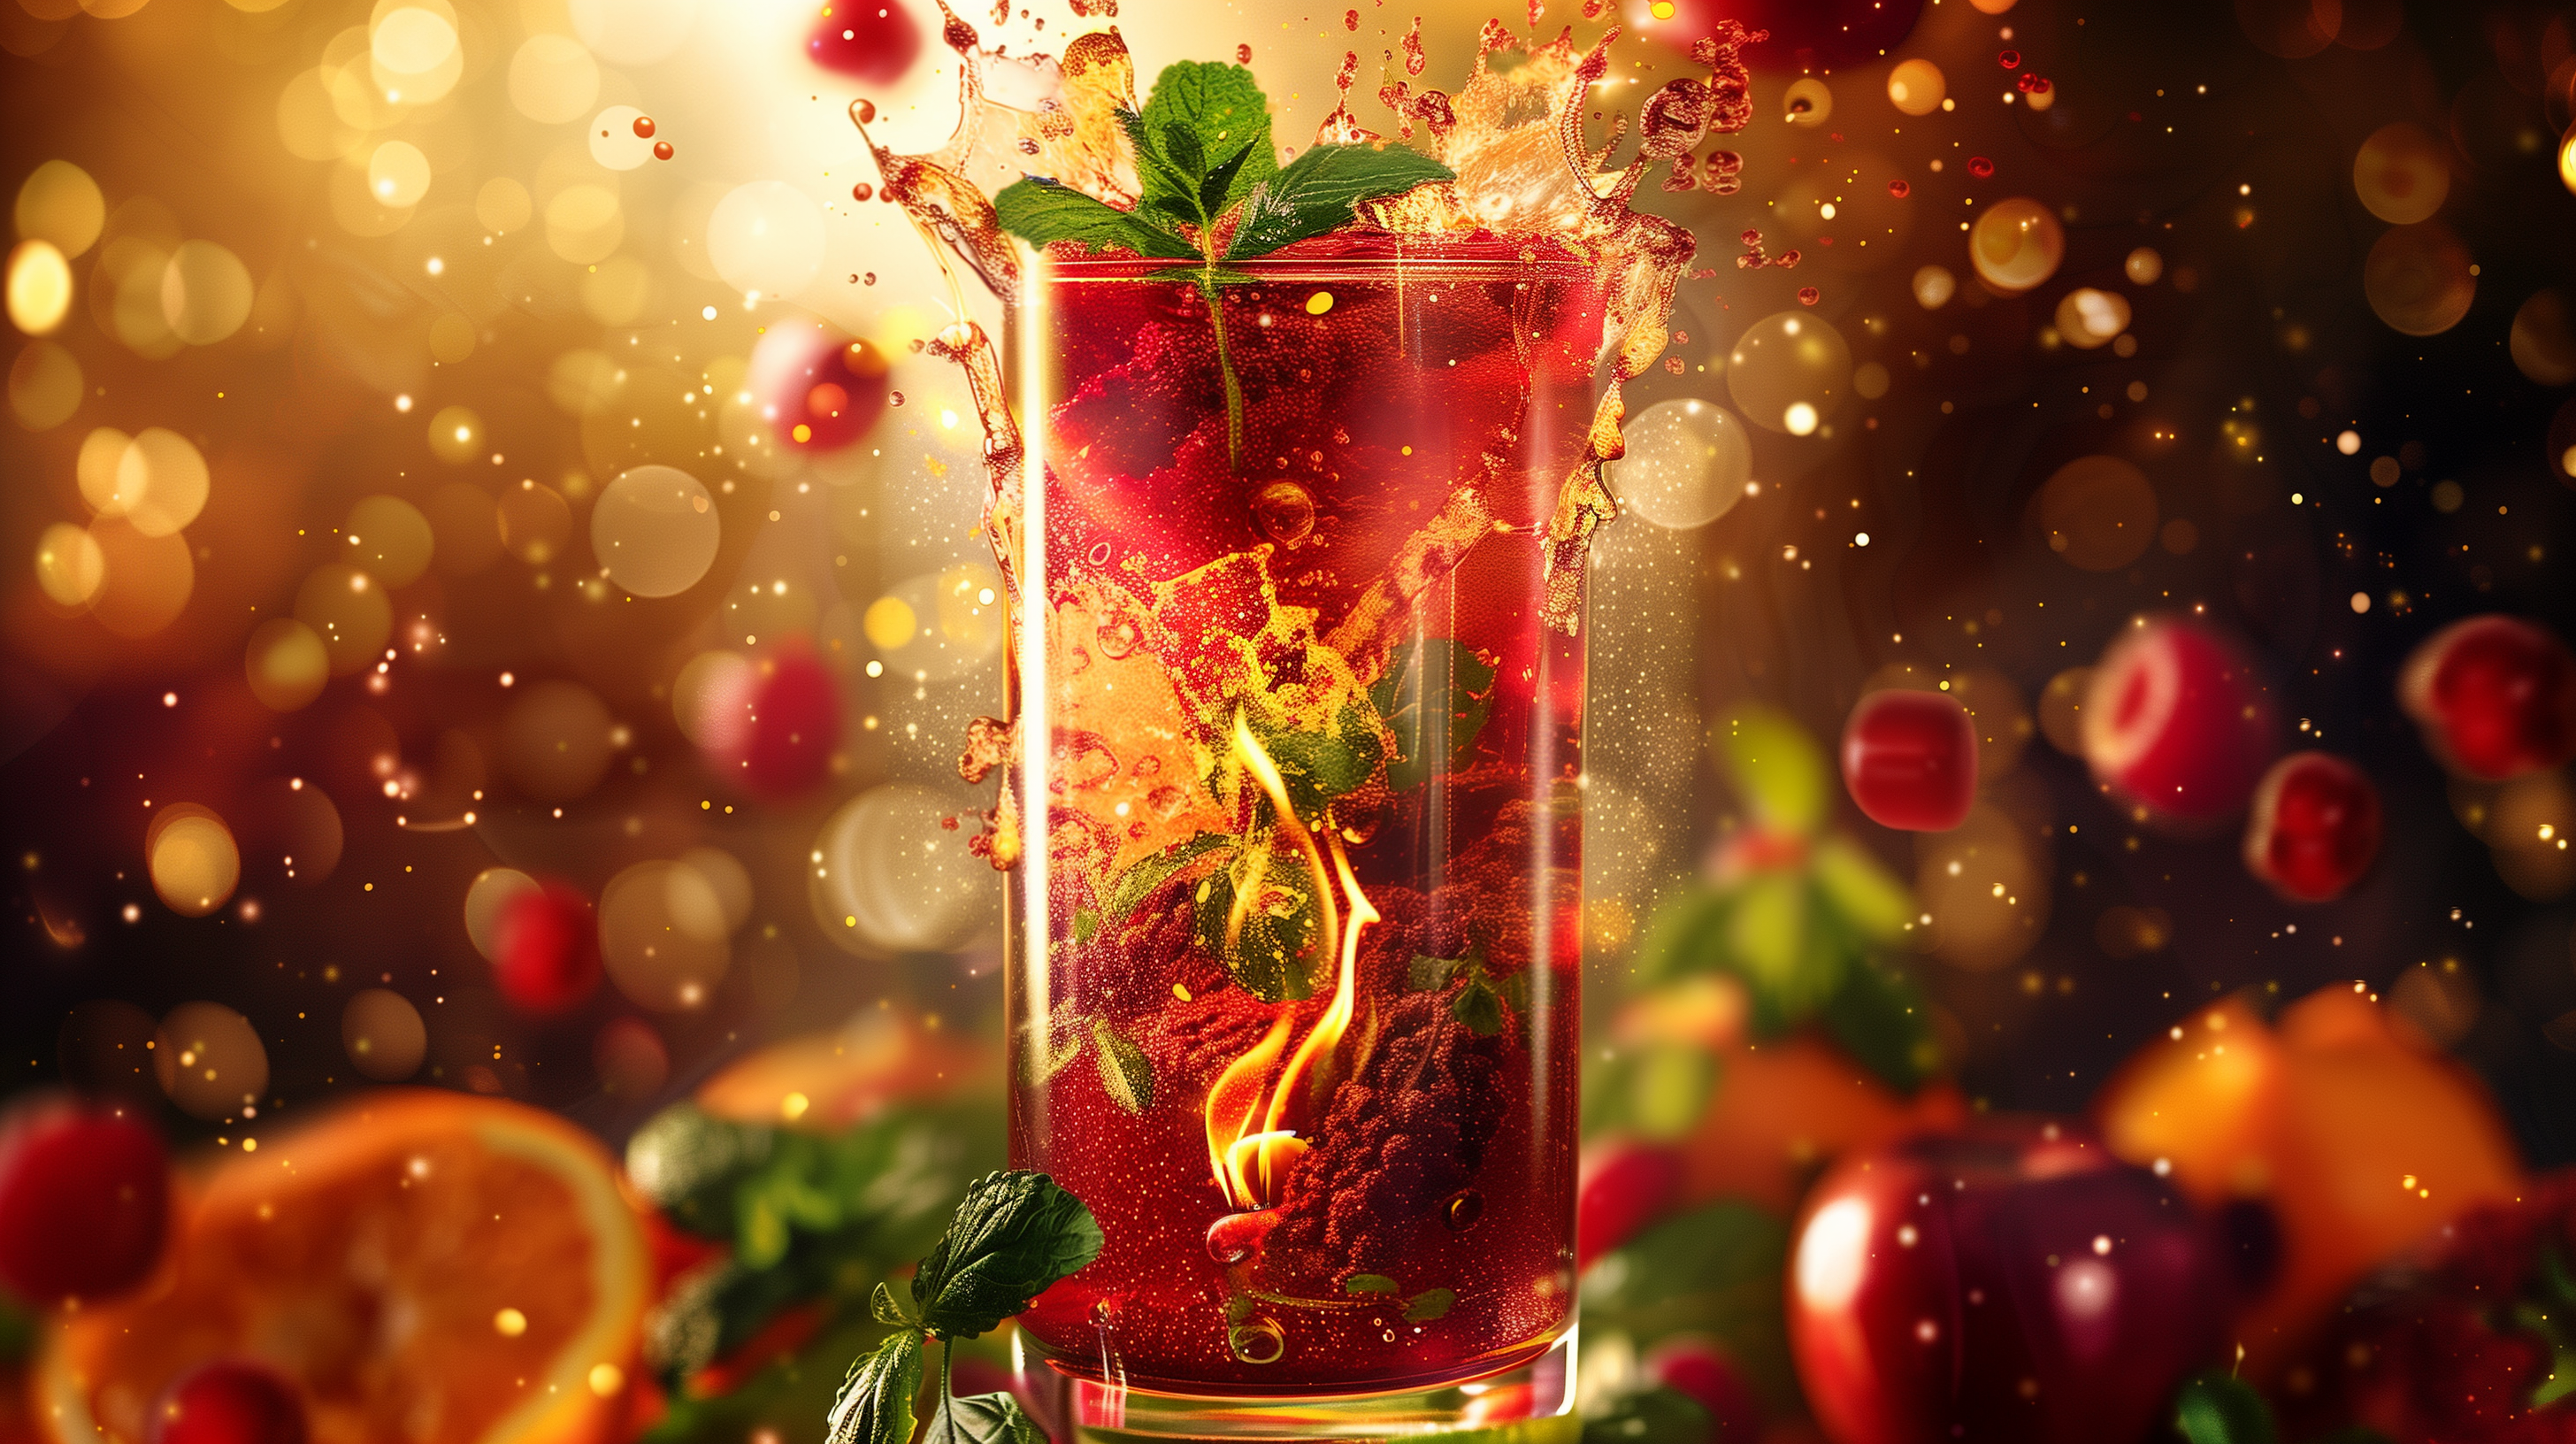 verflowing glass of blended reds and greens, encircled by fresh fruits and vegetables